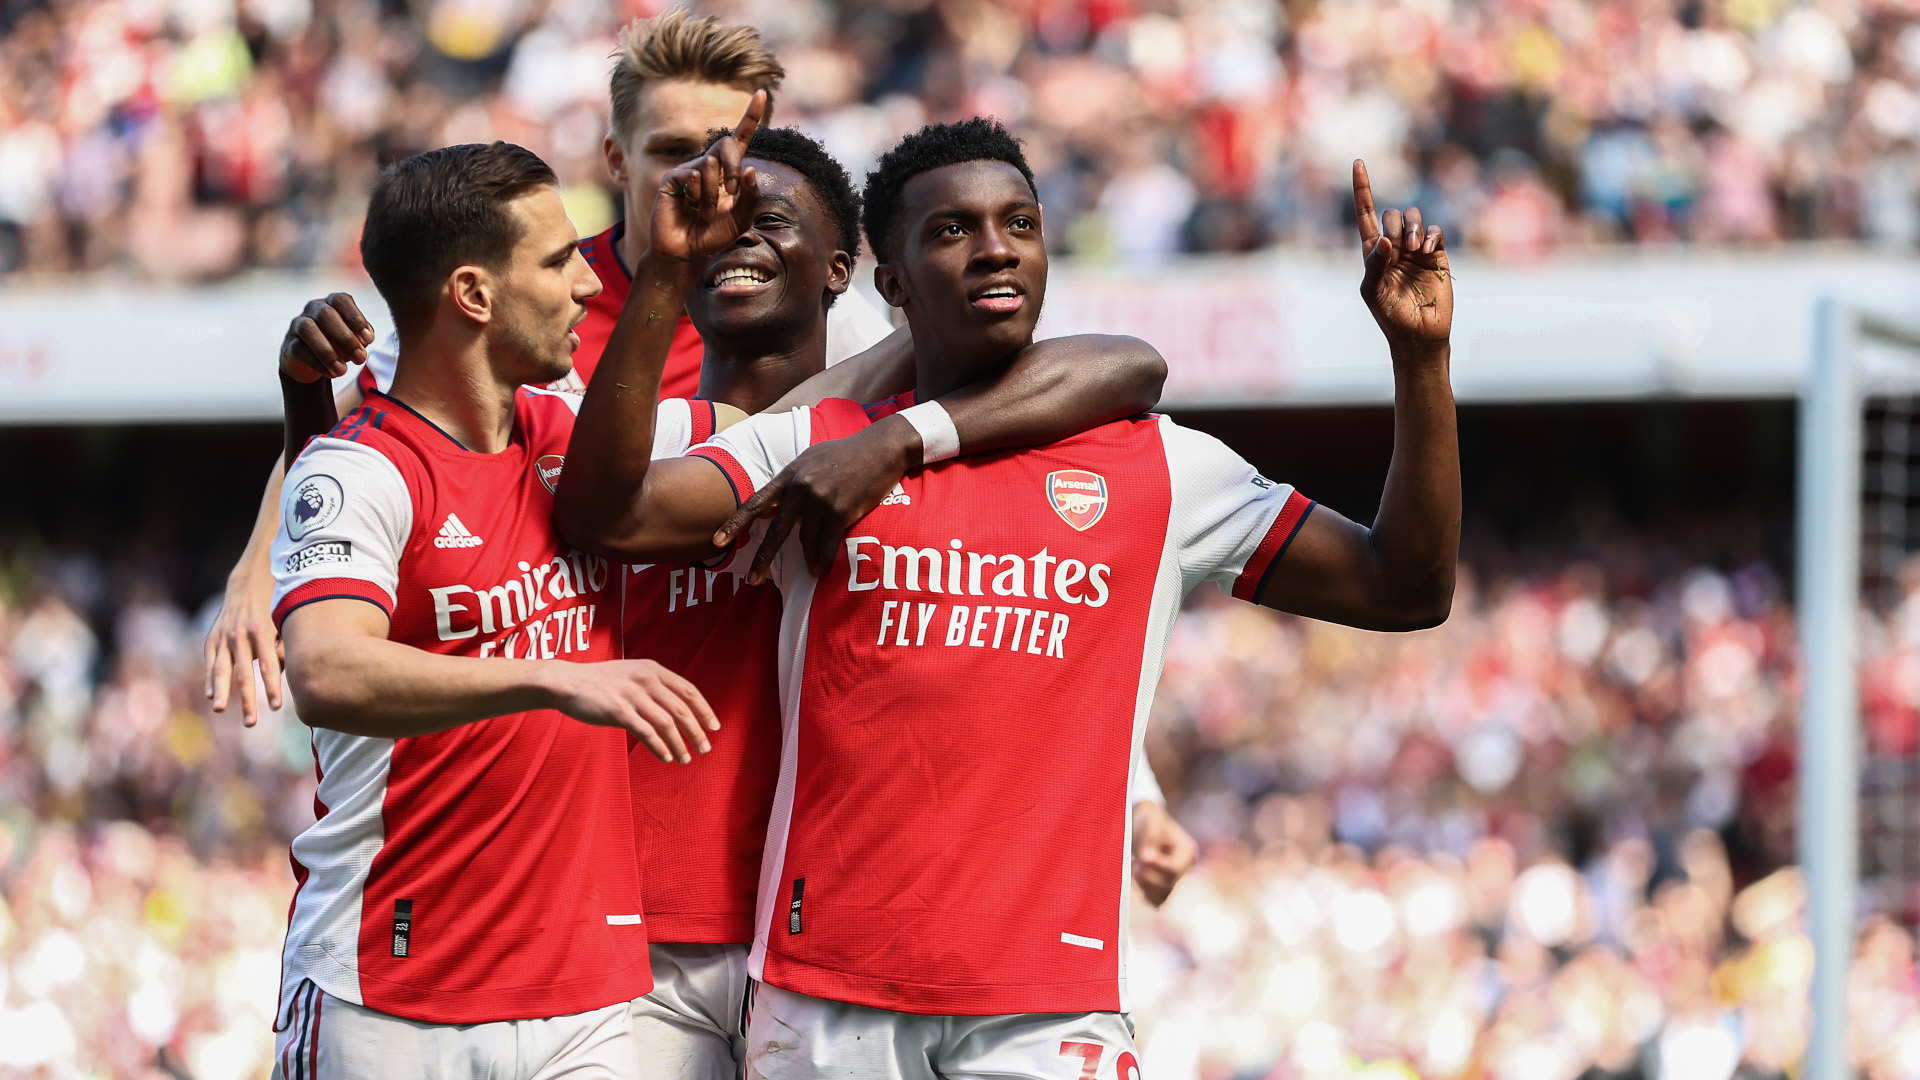 Arsenal vs Nottingham Forest live stream how to watch the Premier League online and on TV from anywhere, team news TechRadar